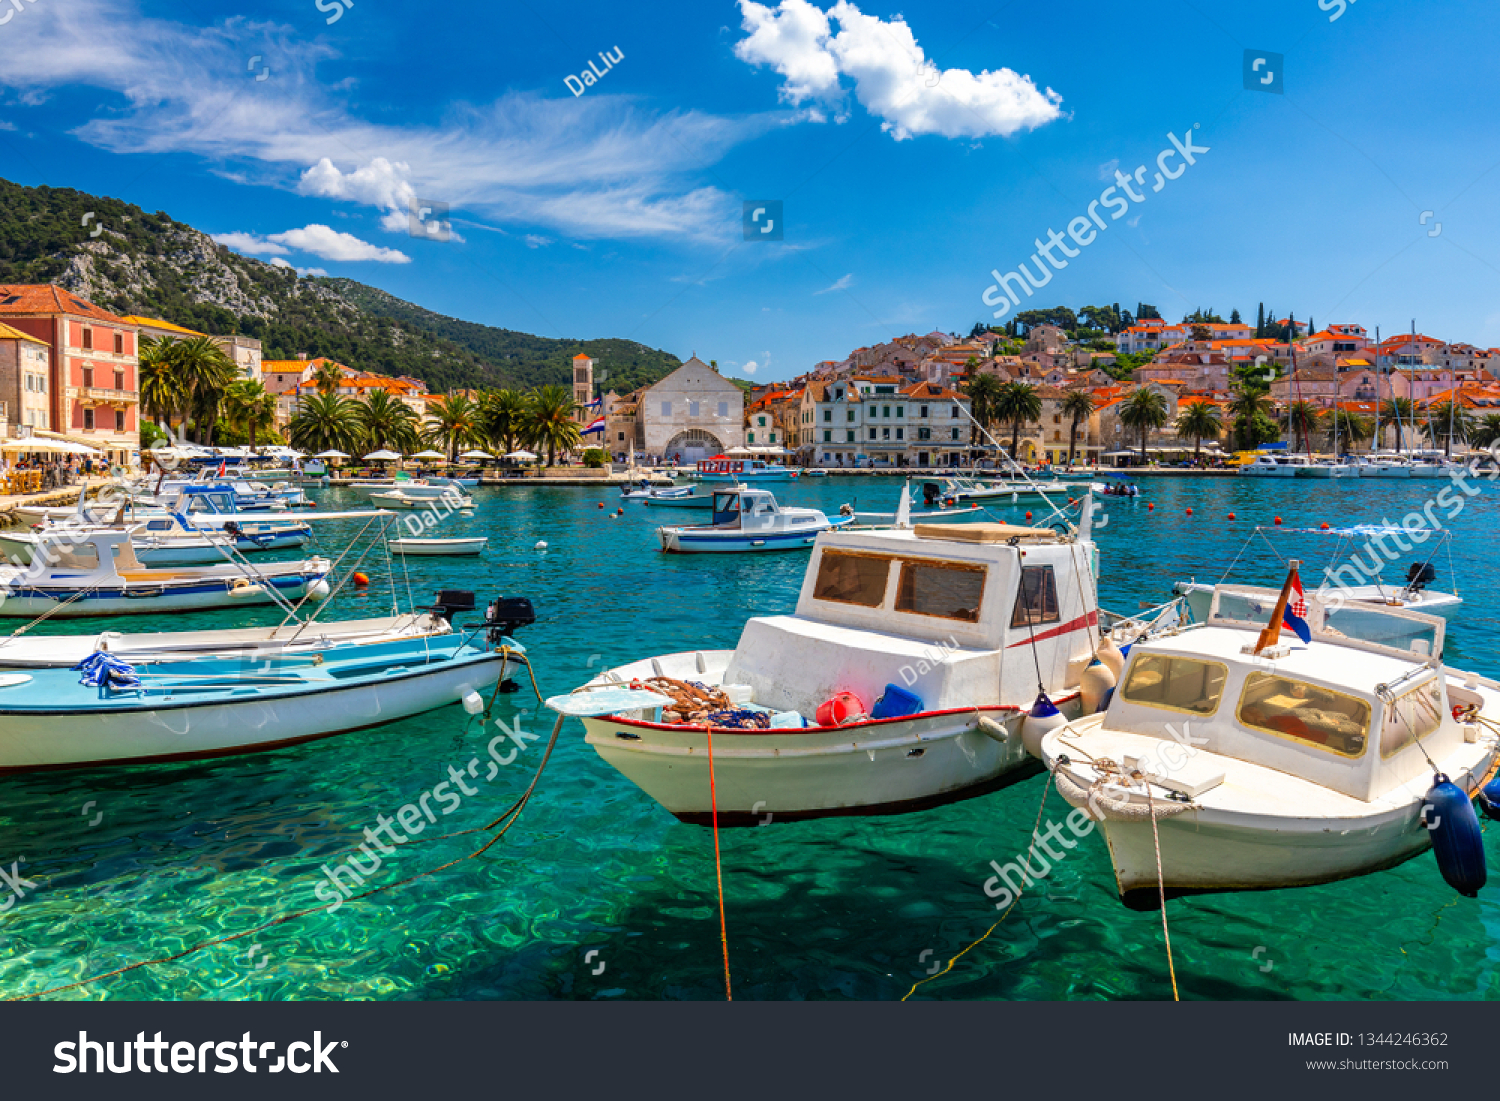 View at amazing archipelago with boats in front of town Hvar, Croatia. Harbor of old Adriatic island town Hvar. Popular touristic destination of Croatia. Amazing Hvar city on Hvar island, Croatia.  #1344246362